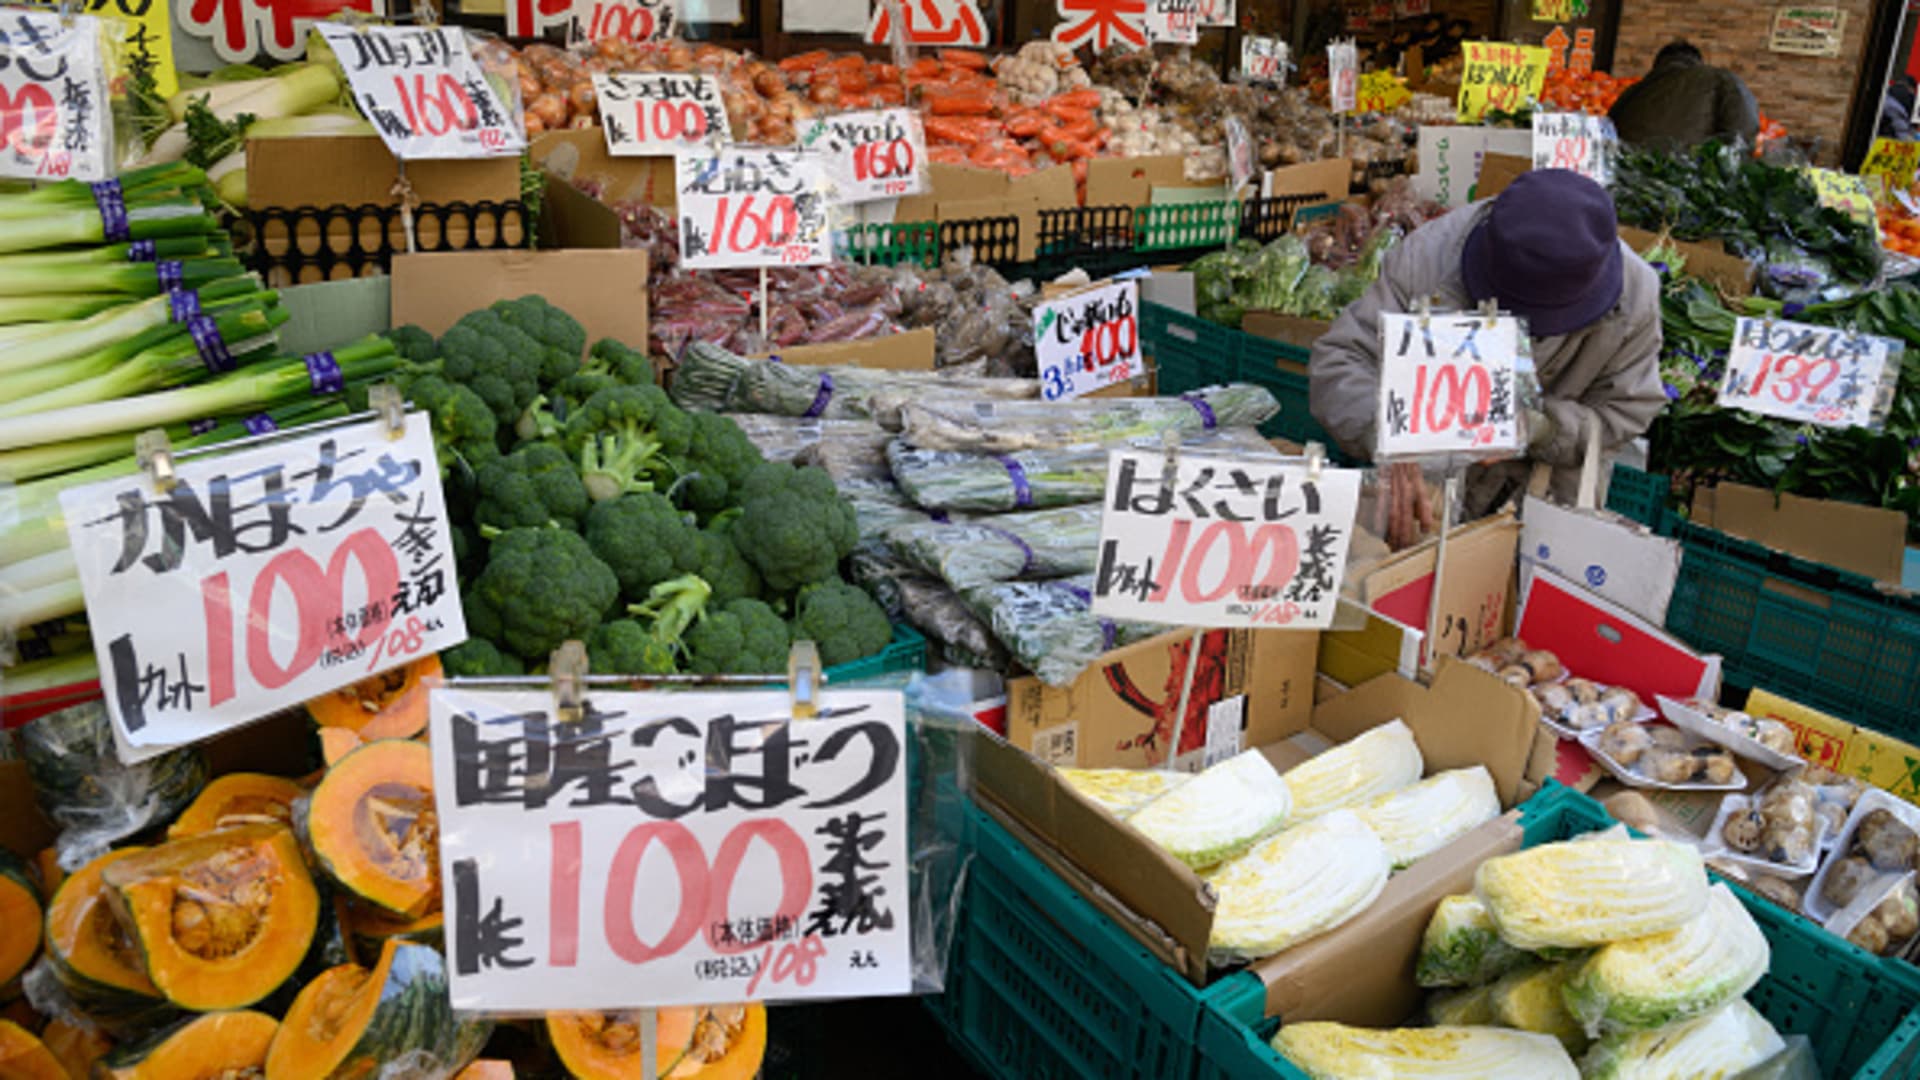 Japan’s March inflation slows to 2.6%, eyes are now on Financial institution of Japan shift